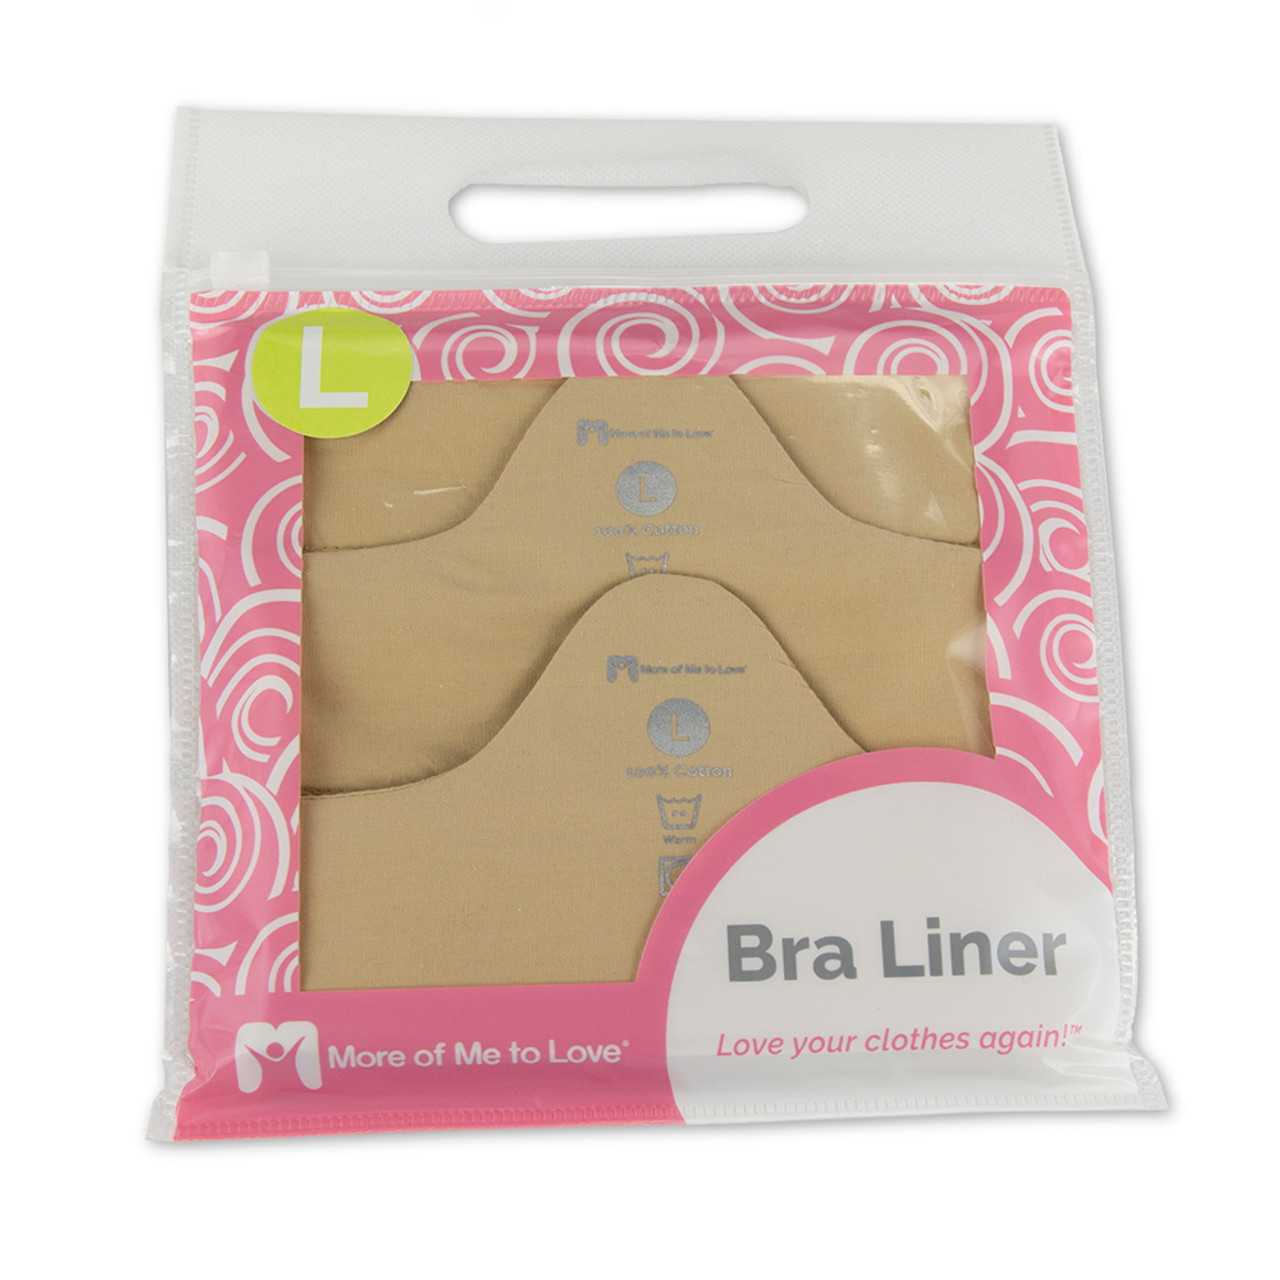 More of Me to Love Feel Fresh Bamboo & Cotton Bra Liner (3-Pack